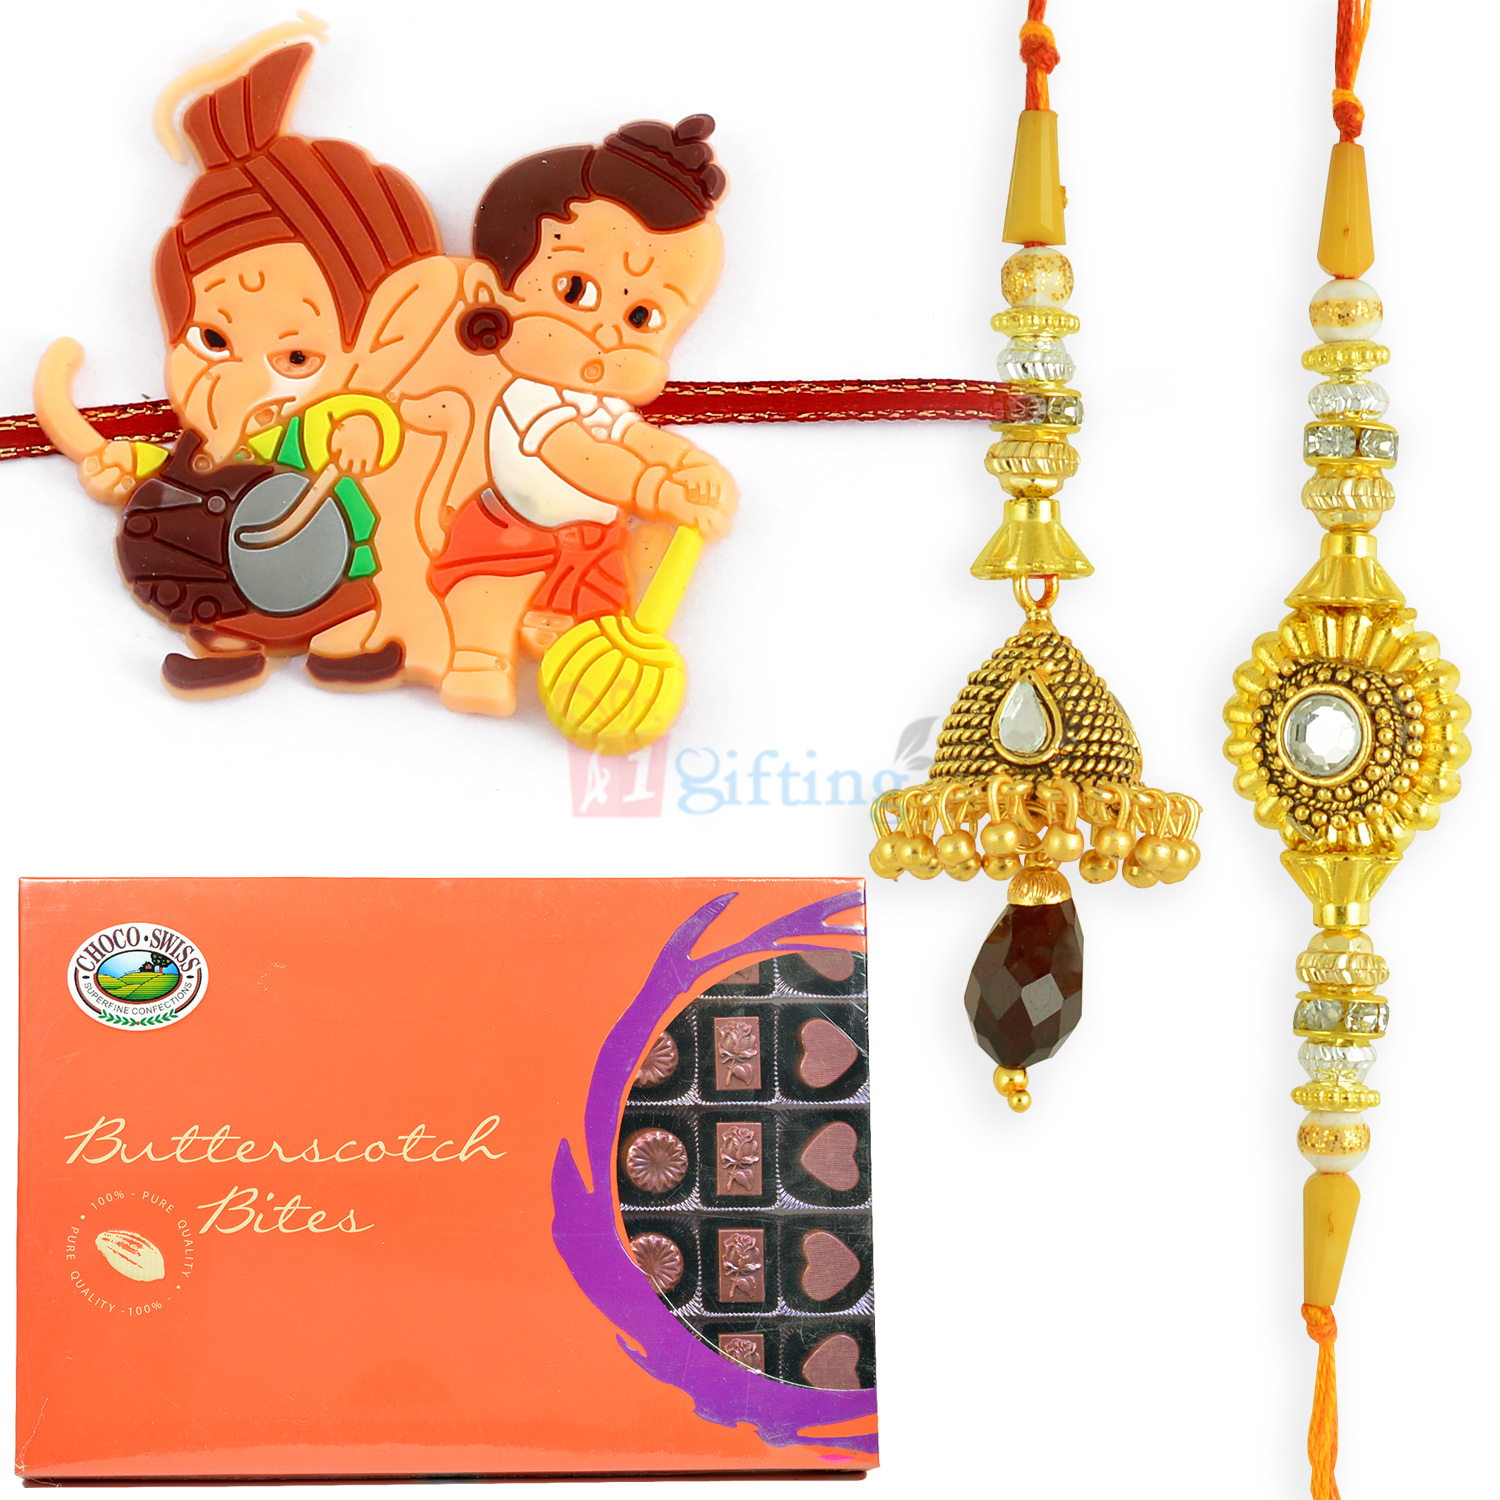 Butterscotch Bites Chocolate with Antique Pair and Kids Rakhi